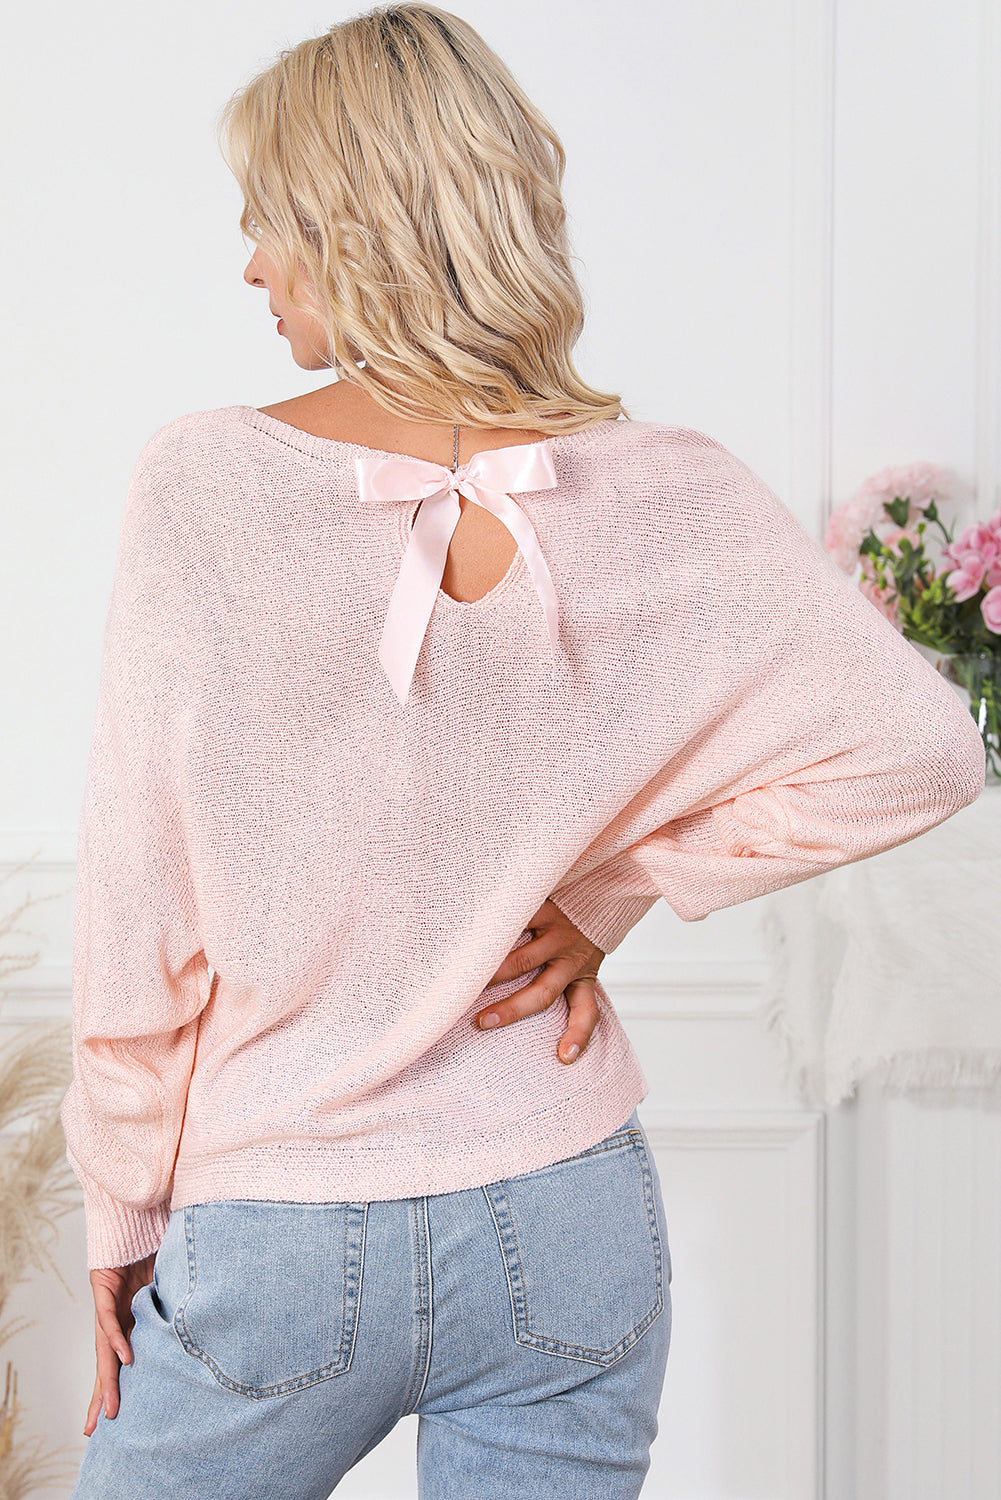 - Ribbon Bow Knot Dolman Sleeve Sweater - 2 colors - womens sweater at TFC&H Co.